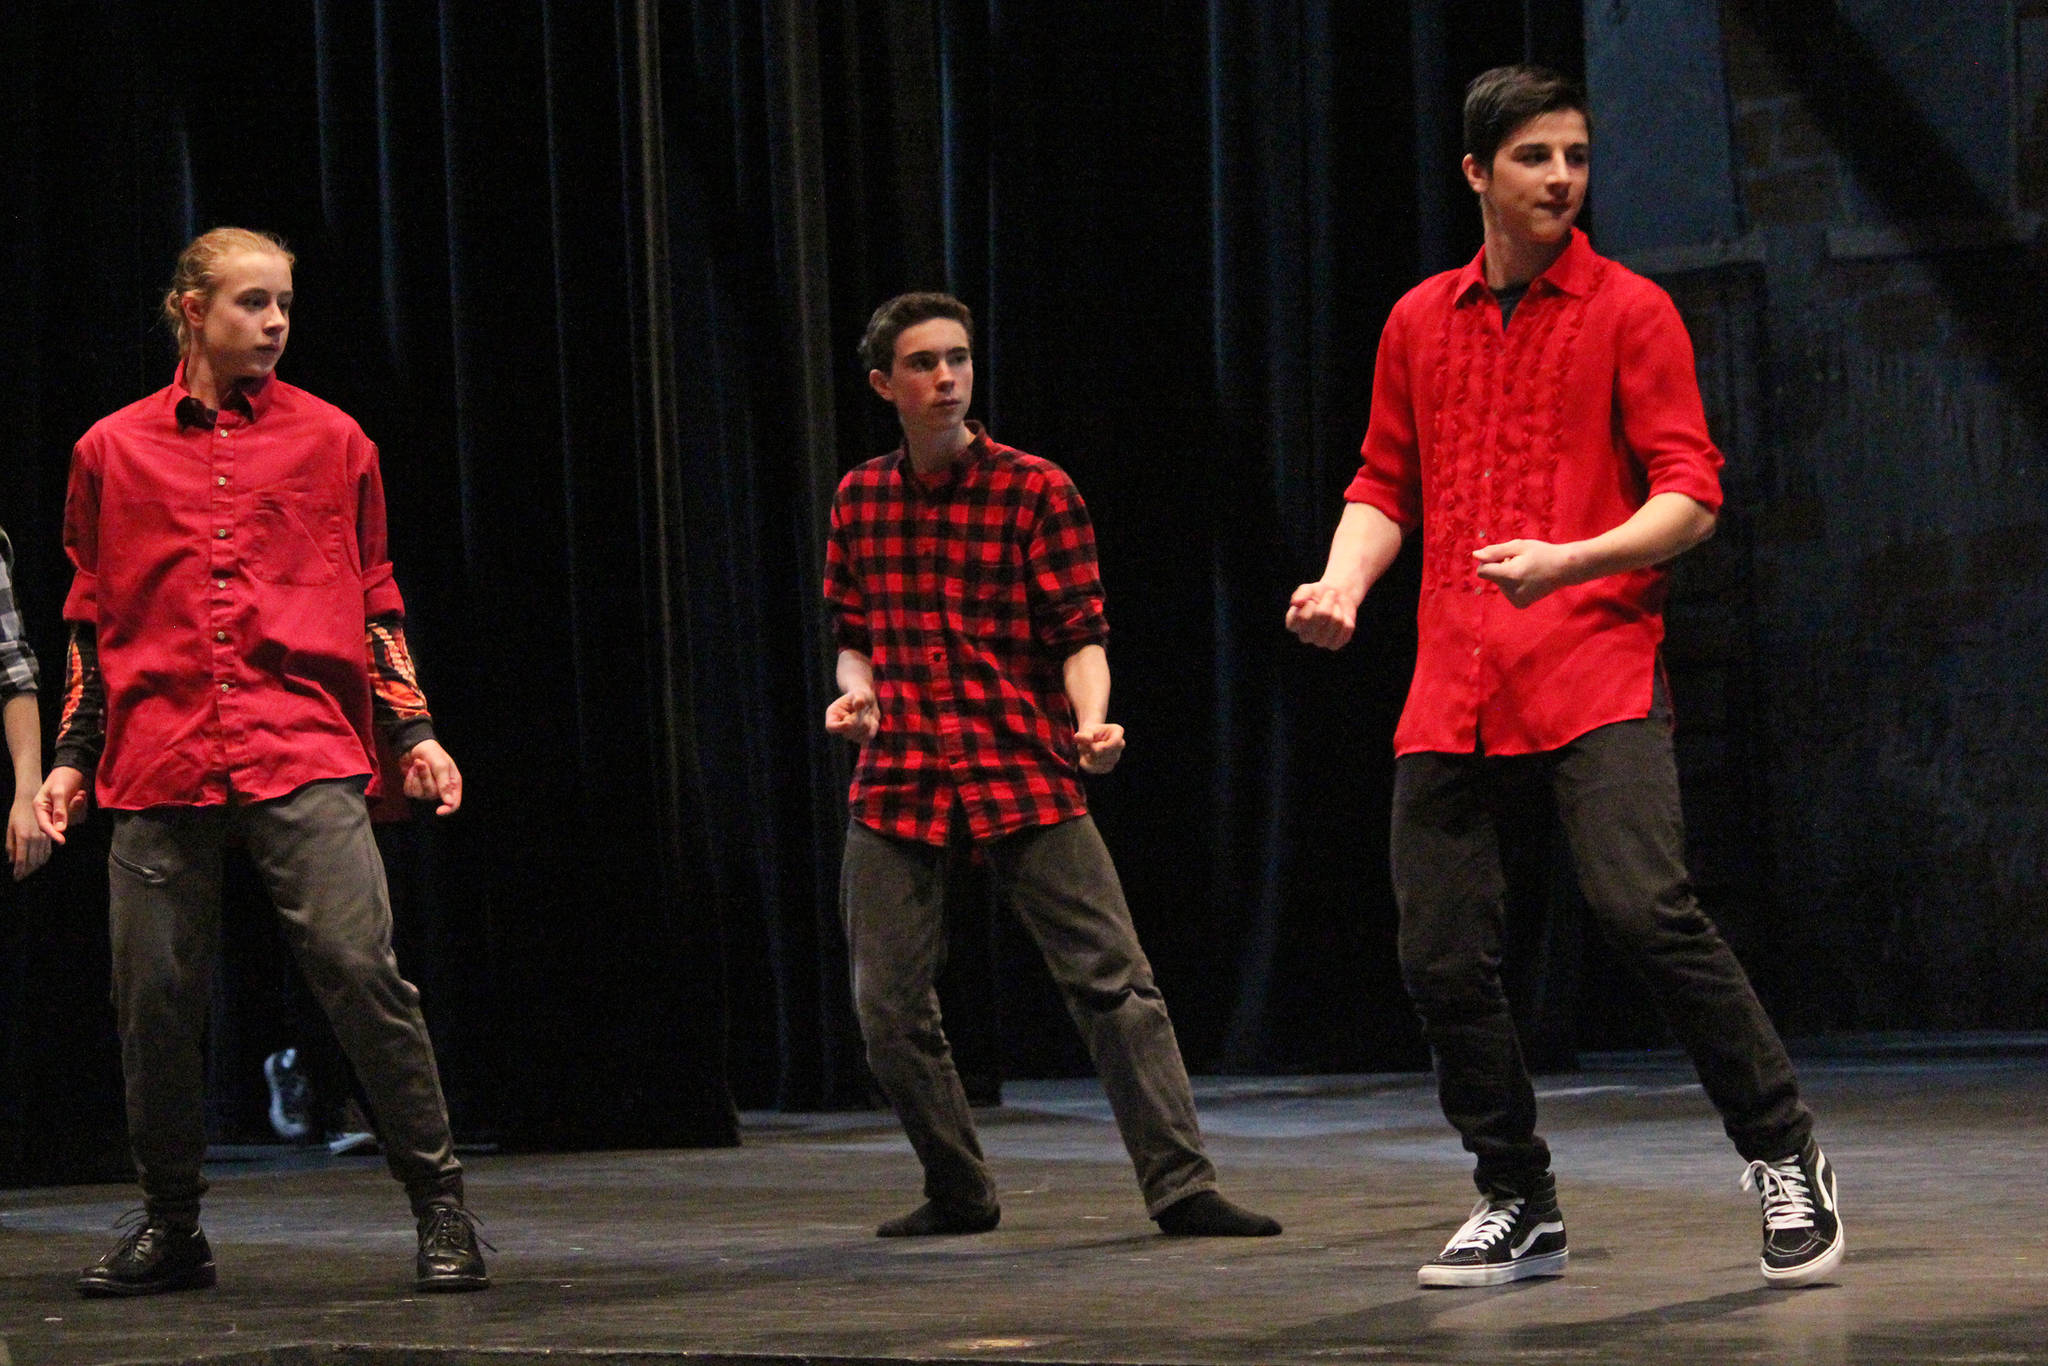 From left to right: Xander Kulhanek, Simon Lopez, and David Weisser perform a dance sequence as members of the Shark gang in “West Side Story” during a dress rehearsal Tuesday, March 20, 2018 at the Mariner Theatre in Homer, Alaska. The musical is this year’s production for the school’s Concert Choir class, and and was last performed by the high school 15 years ago. (Photo by Megan Pacer/Homer News)